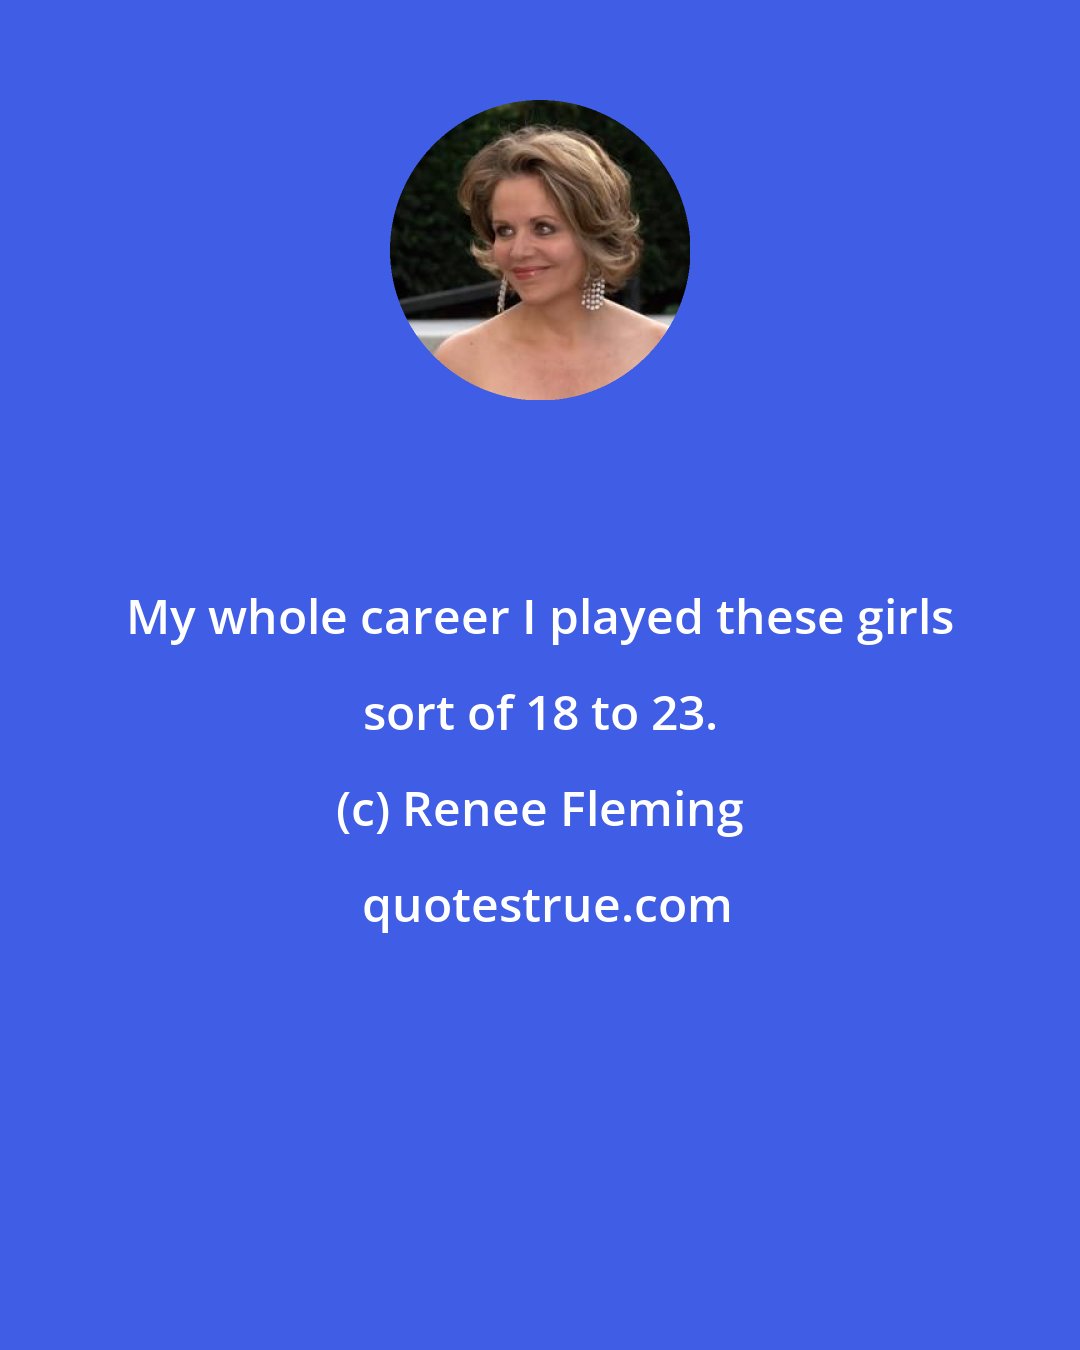 Renee Fleming: My whole career I played these girls sort of 18 to 23.